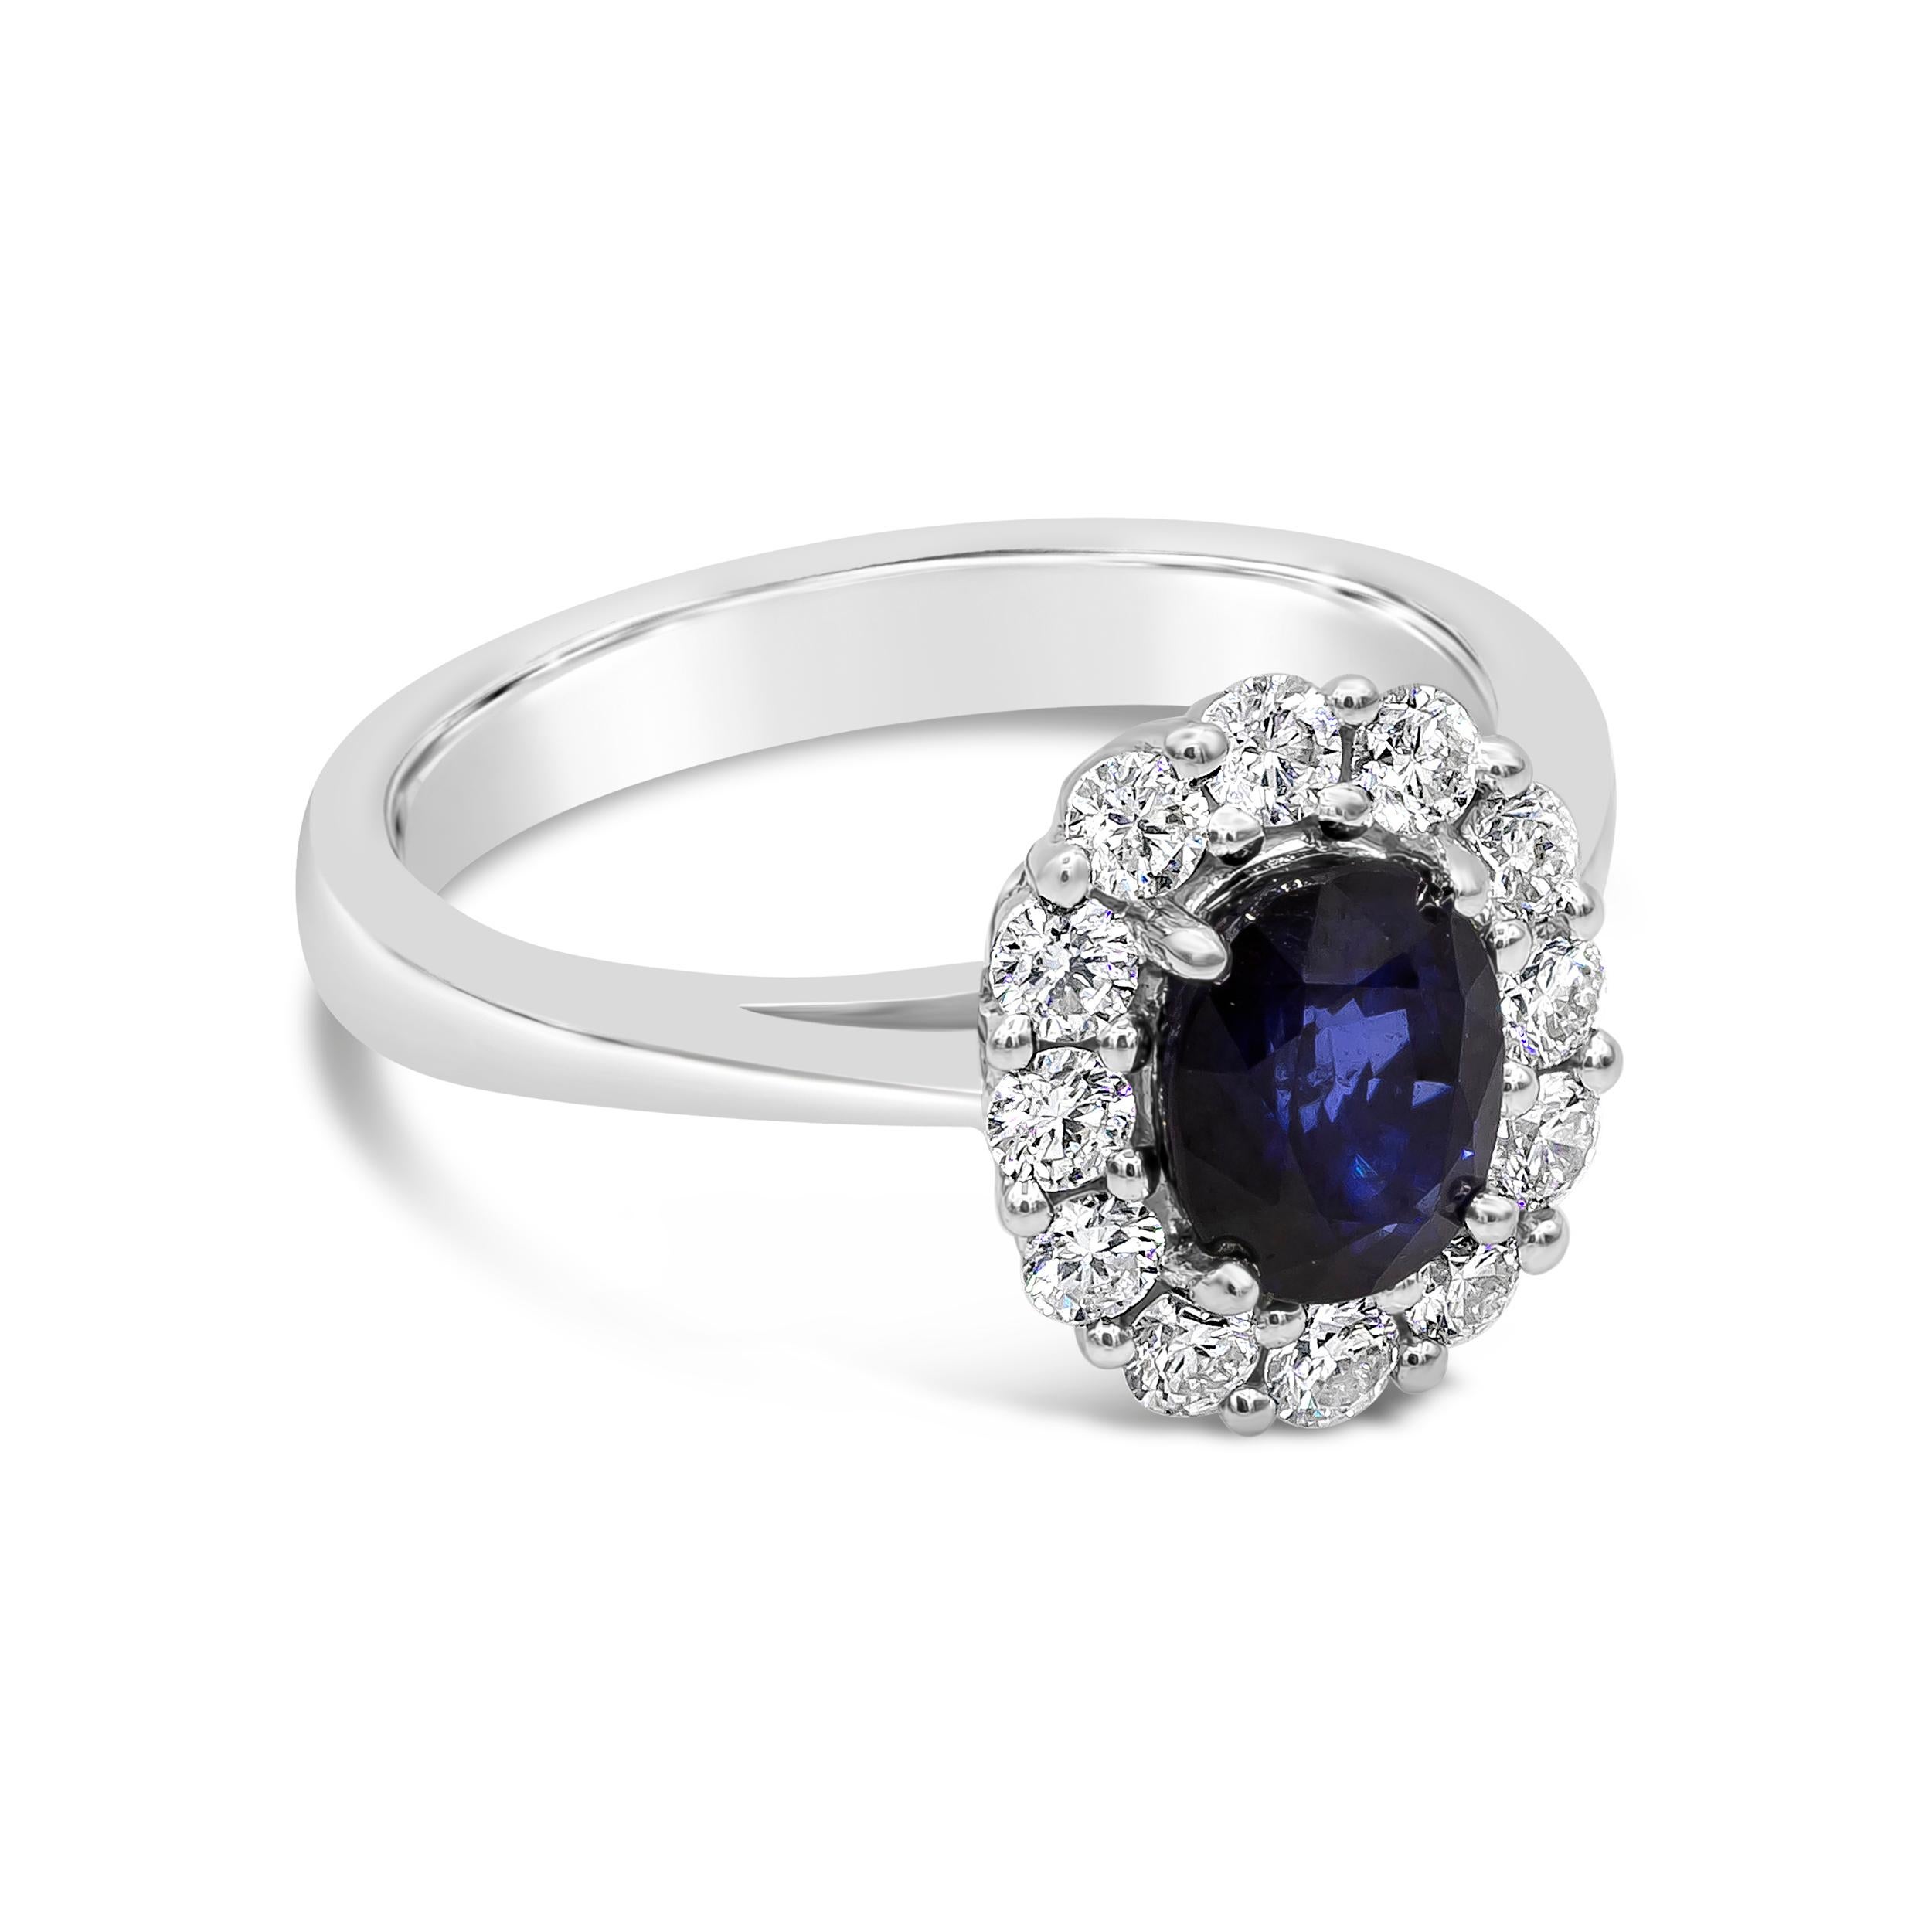 An elegant and classic engagement ring showcasing a 1.60 carat oval cut blue sapphire, surrounded by a single row of 12 round brilliant diamonds weighing 0.54 carats total. Finely made in 18k white gold. Size 6.5 US, resizable upon request.

Roman